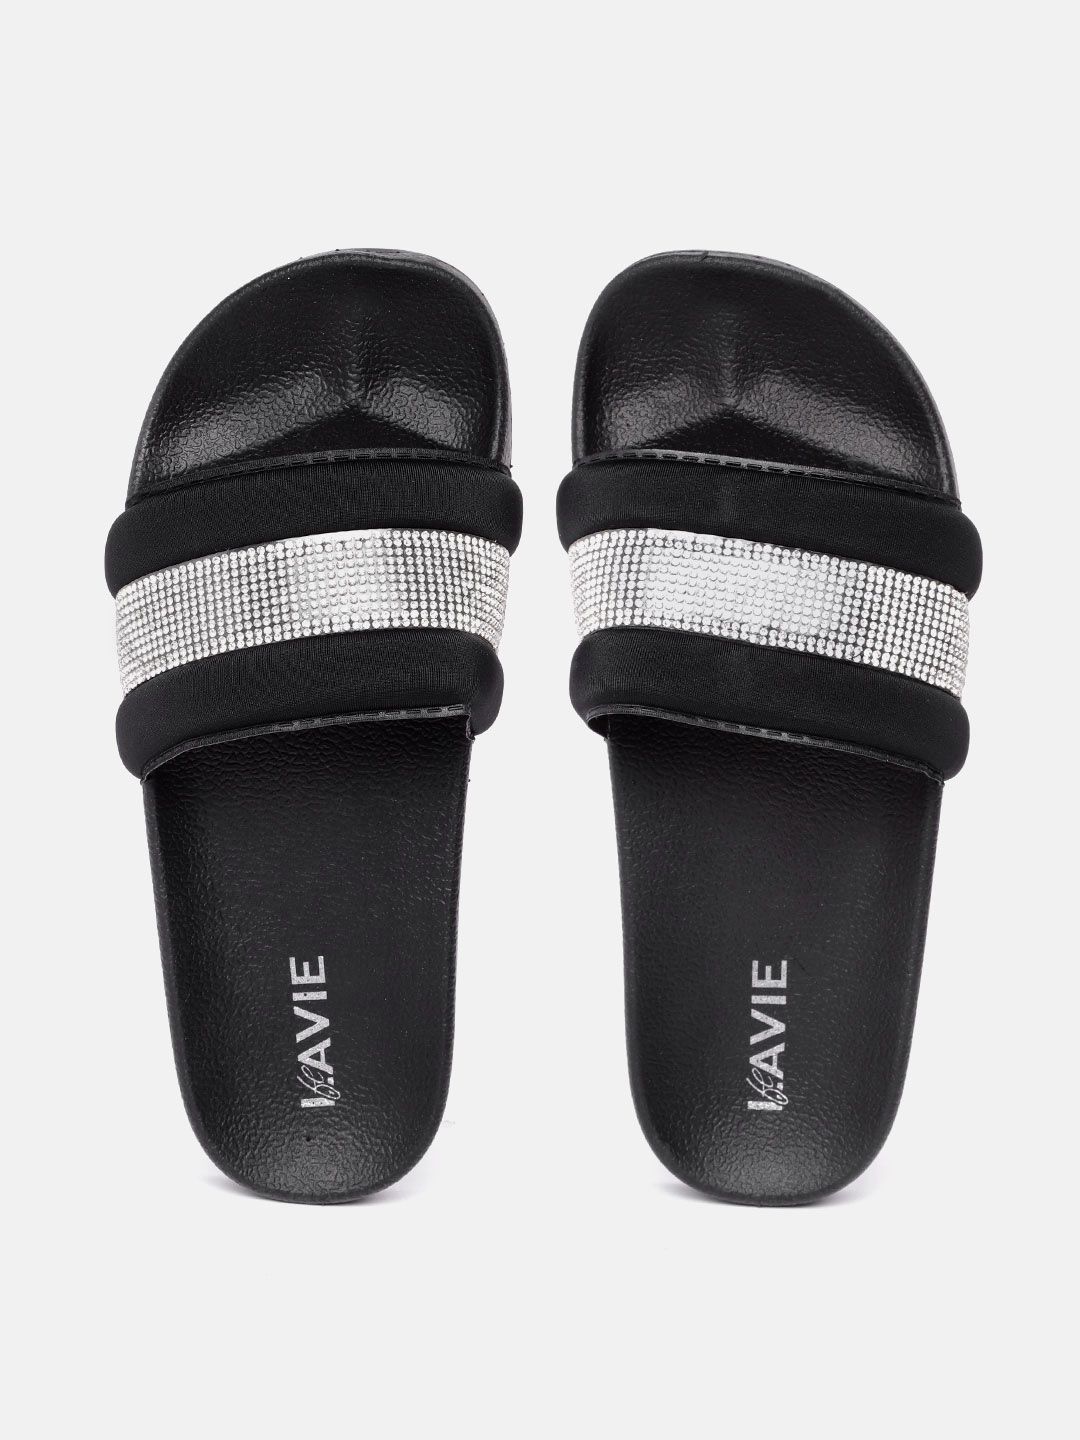 Lavie Women Black & Silver-Toned Embellished Sliders Price in India